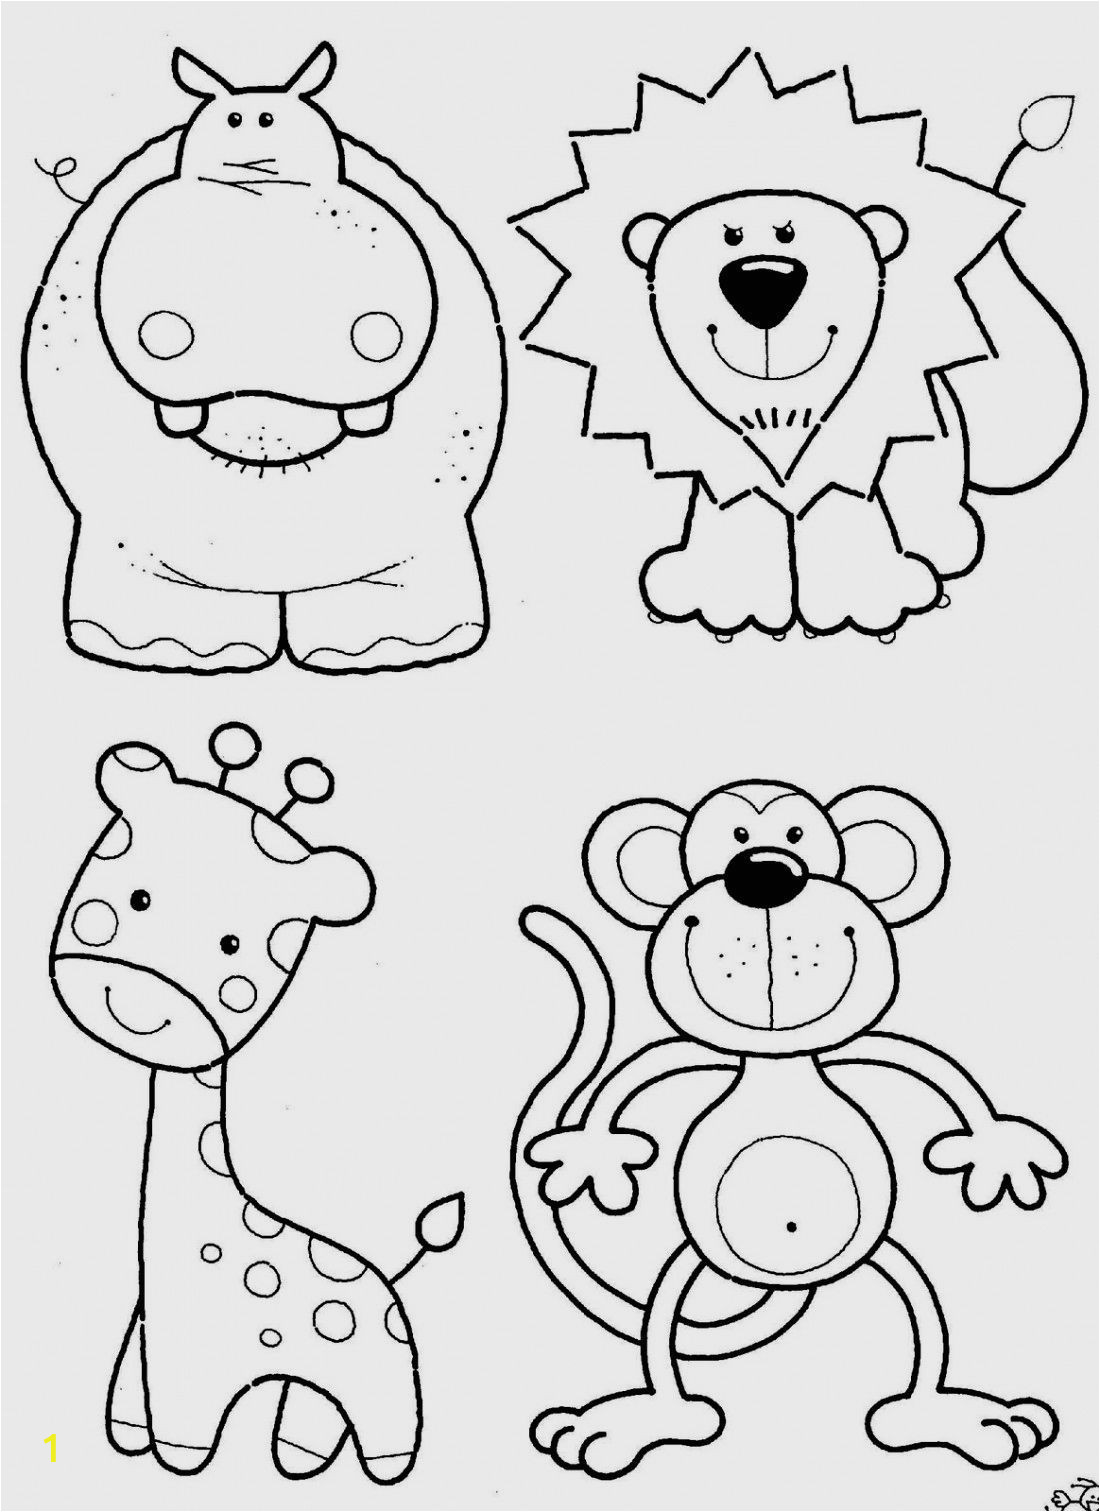 Zoo Animal Coloring Pages for Preschool Free Coloring Pages for toddlers